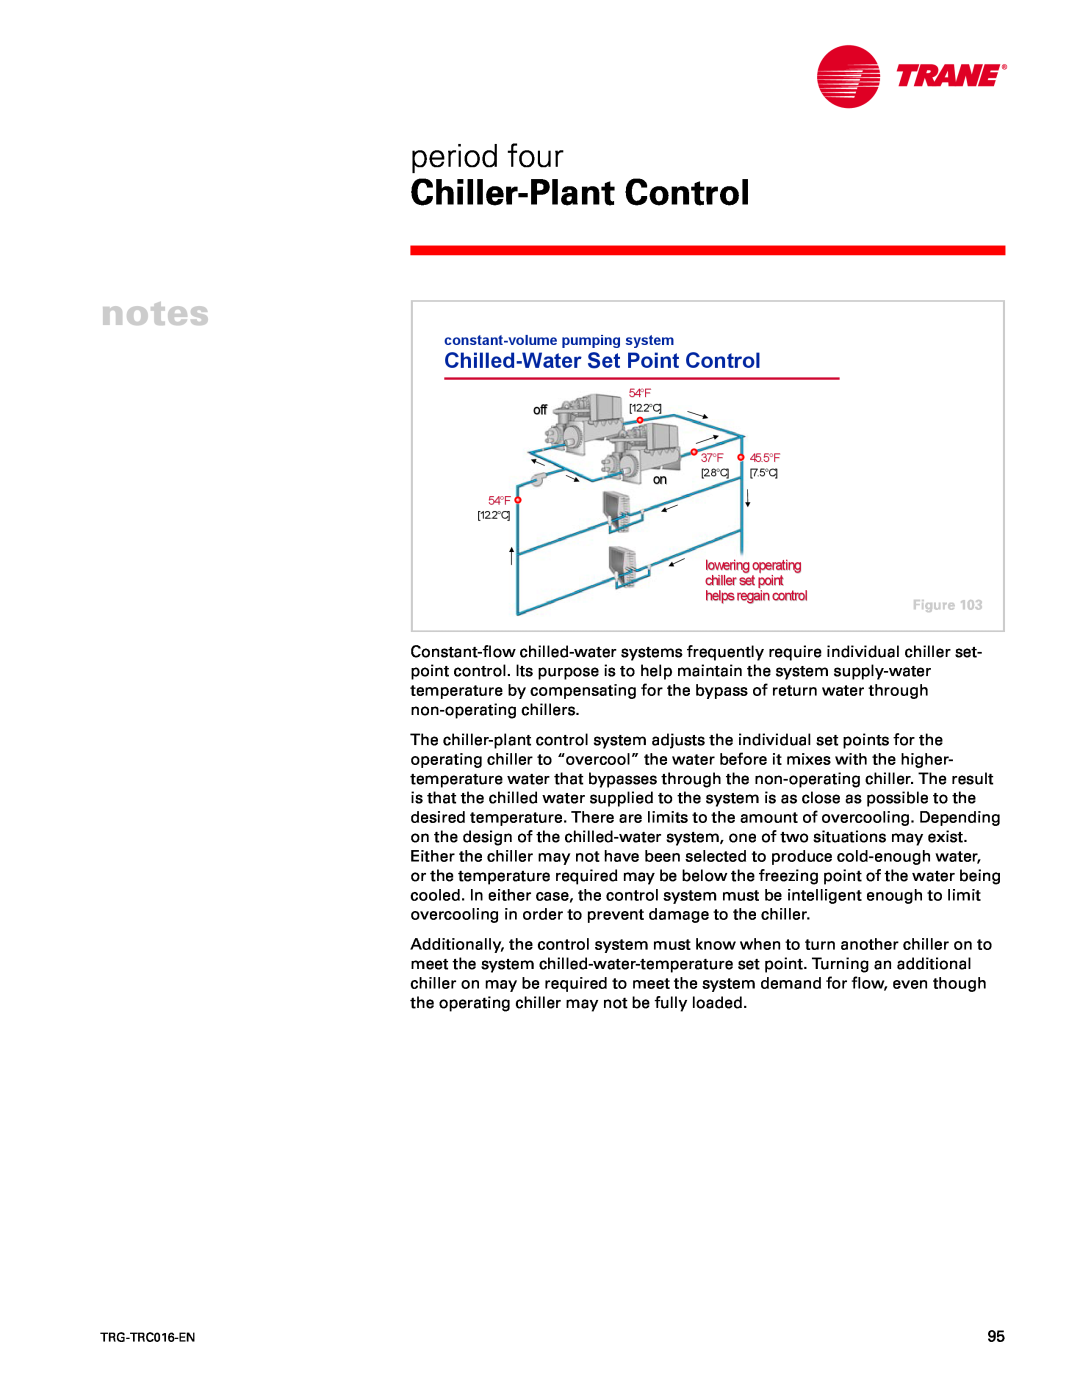 Trane TRG-TRC016-EN manual Chilled-WaterSet Point Control, notes, Chiller-PlantControl, period four 